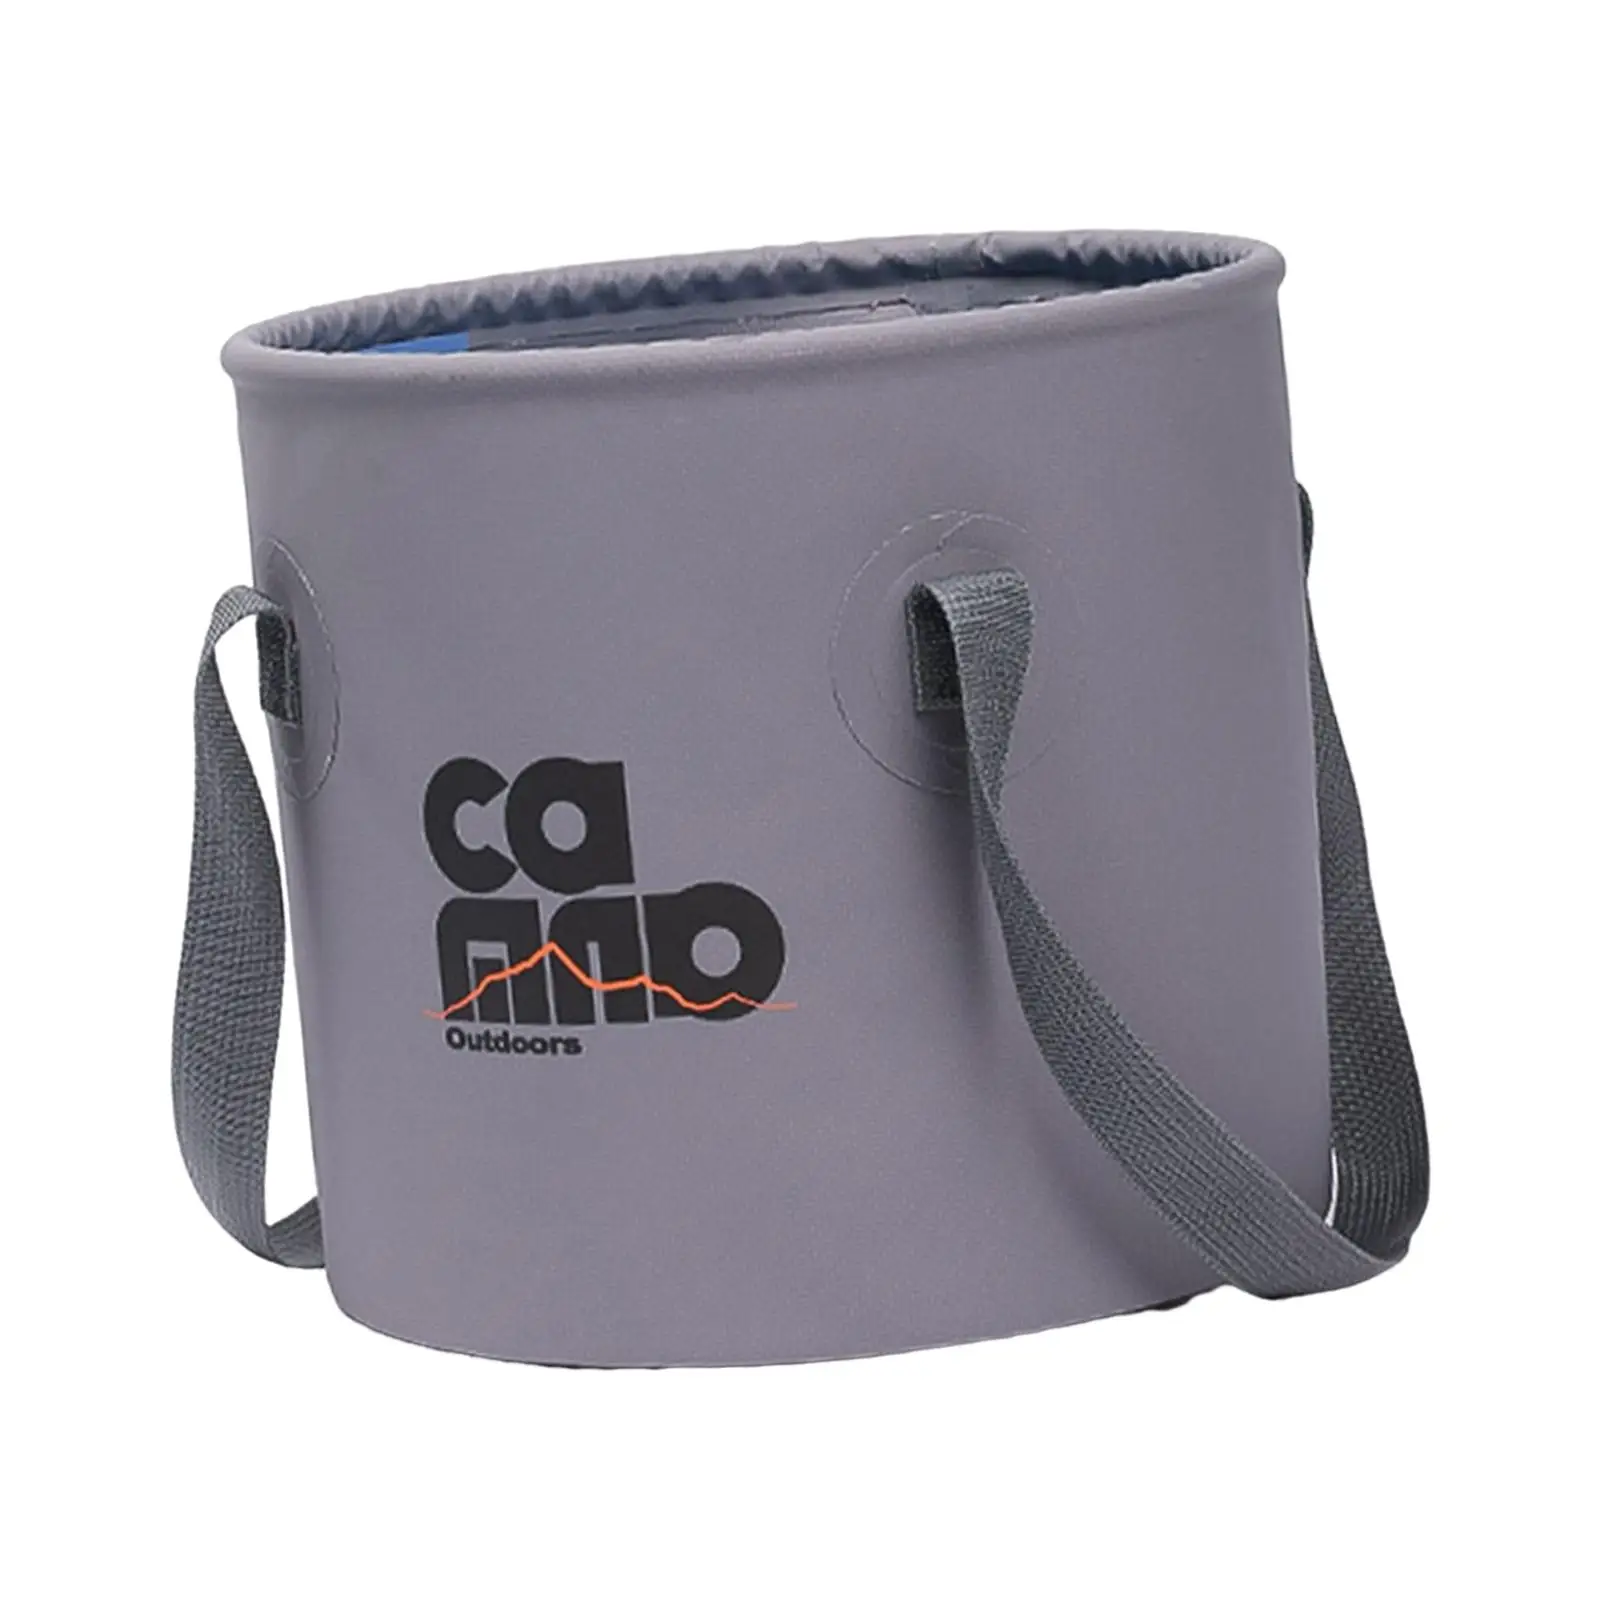 Collapsible Bucket Folding Large Capacity for Travelling Outdoor Camping